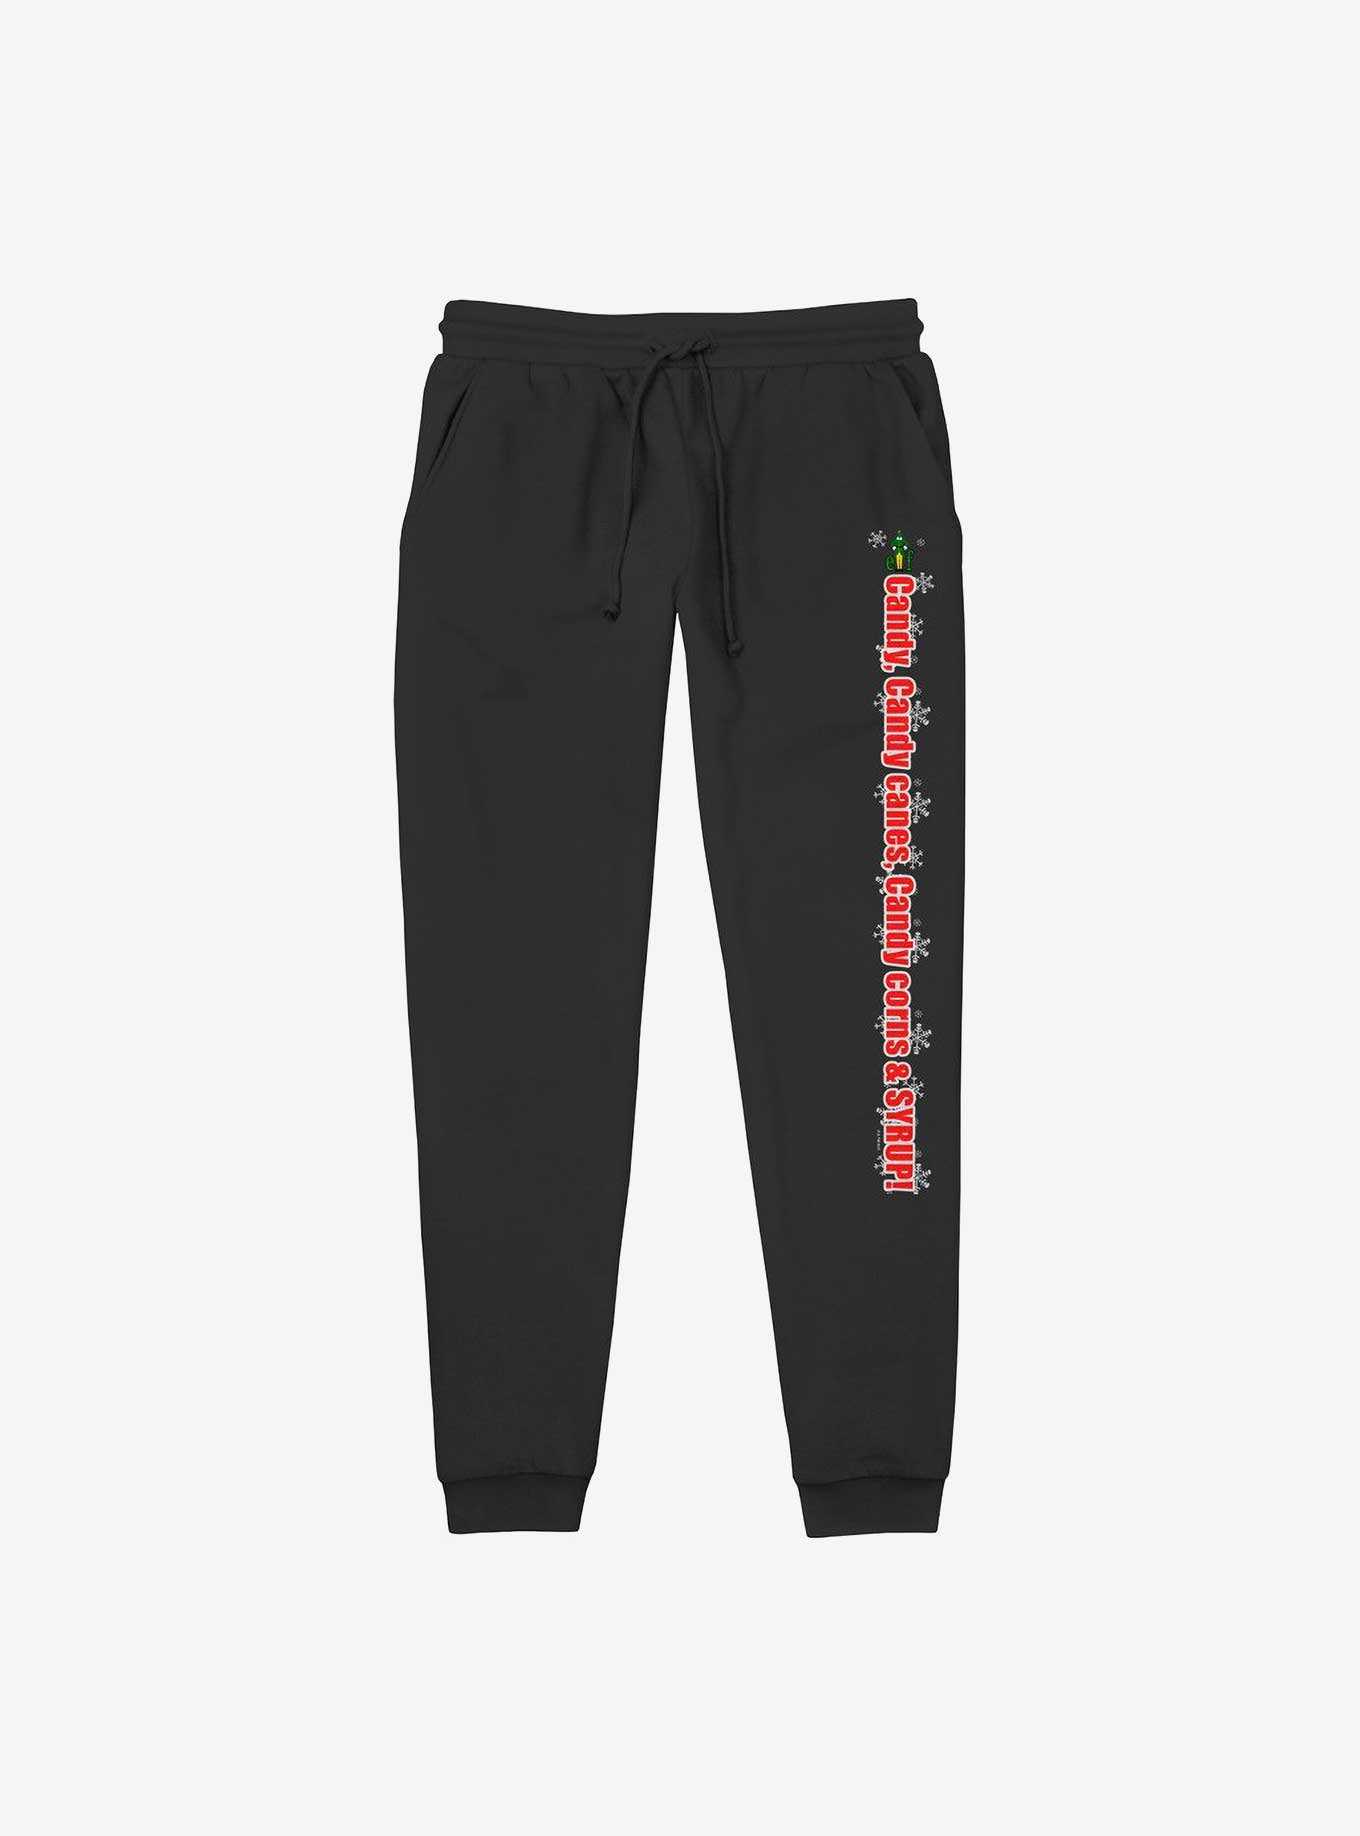 Elf Candy Candy Canes Candy Corns & Syrup Jogger Sweatpants, , hi-res